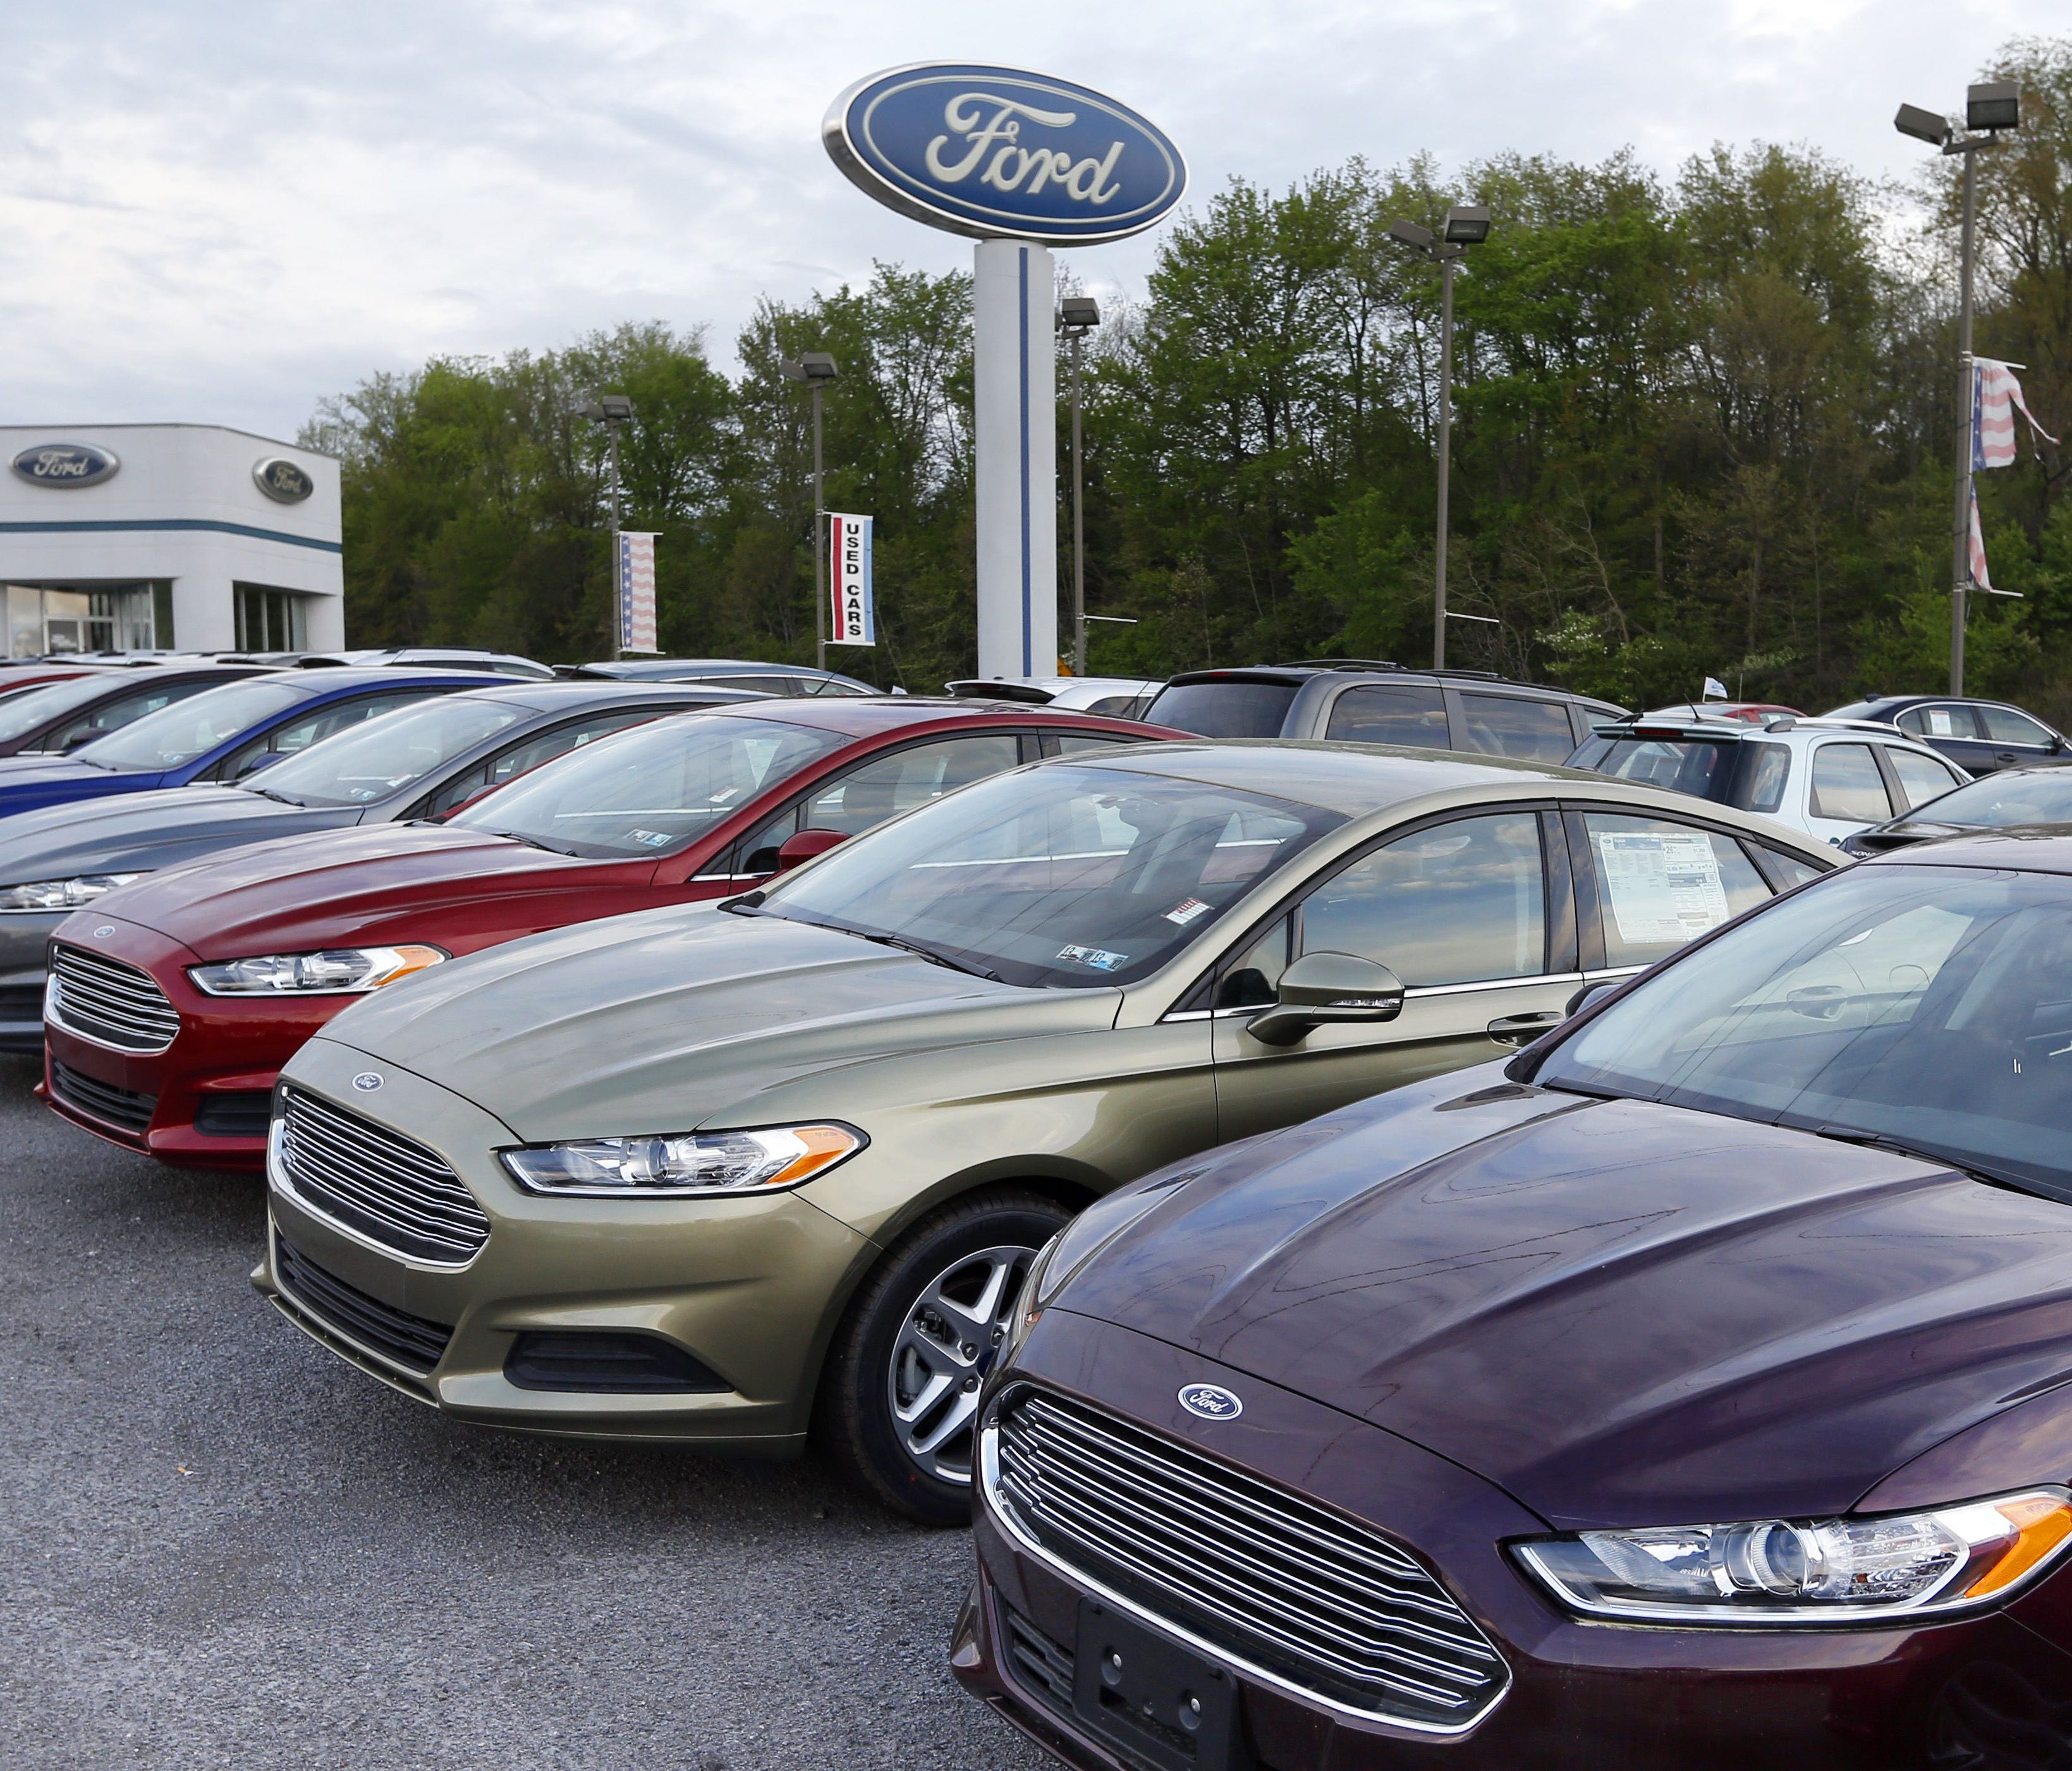 Cars are seen at an automobile dealer in Zelienople, Pa.